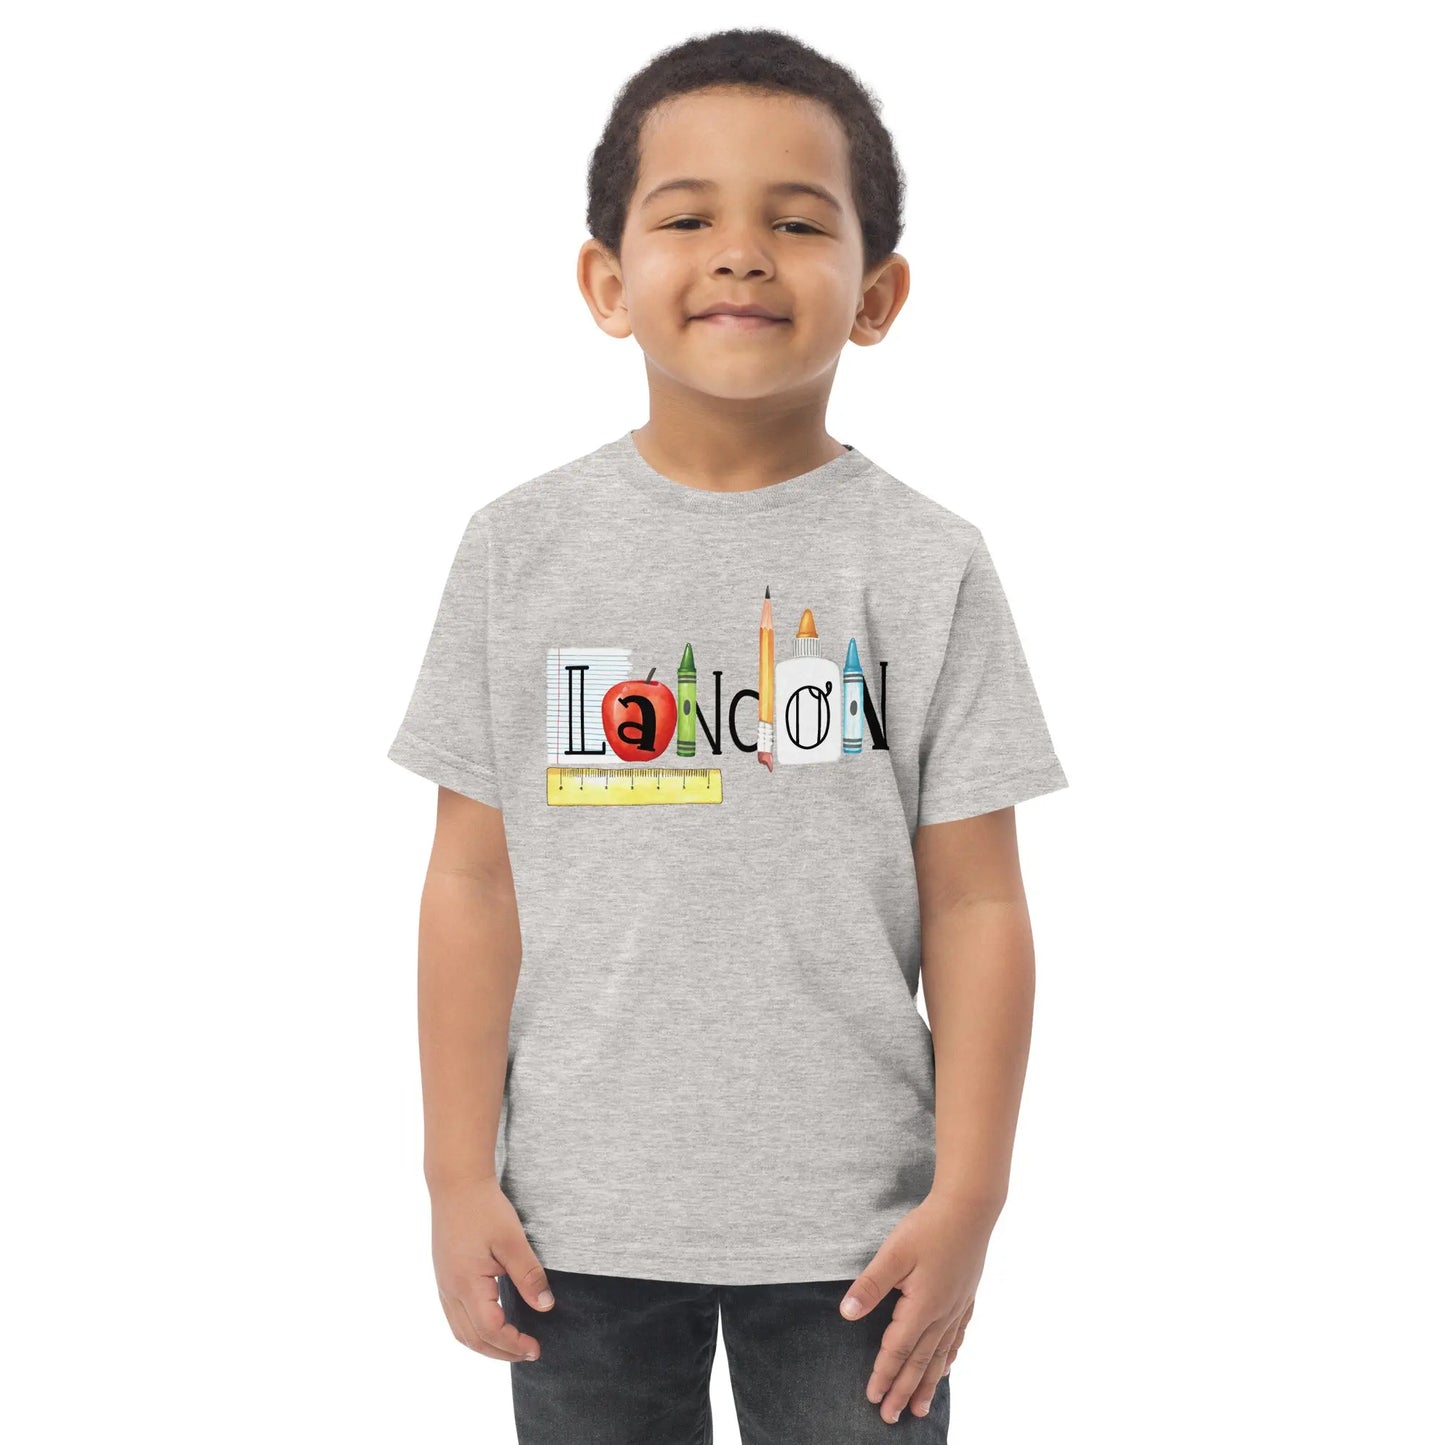 Back to School Name Toddler t-shirt - grey Amazing Faith Designs